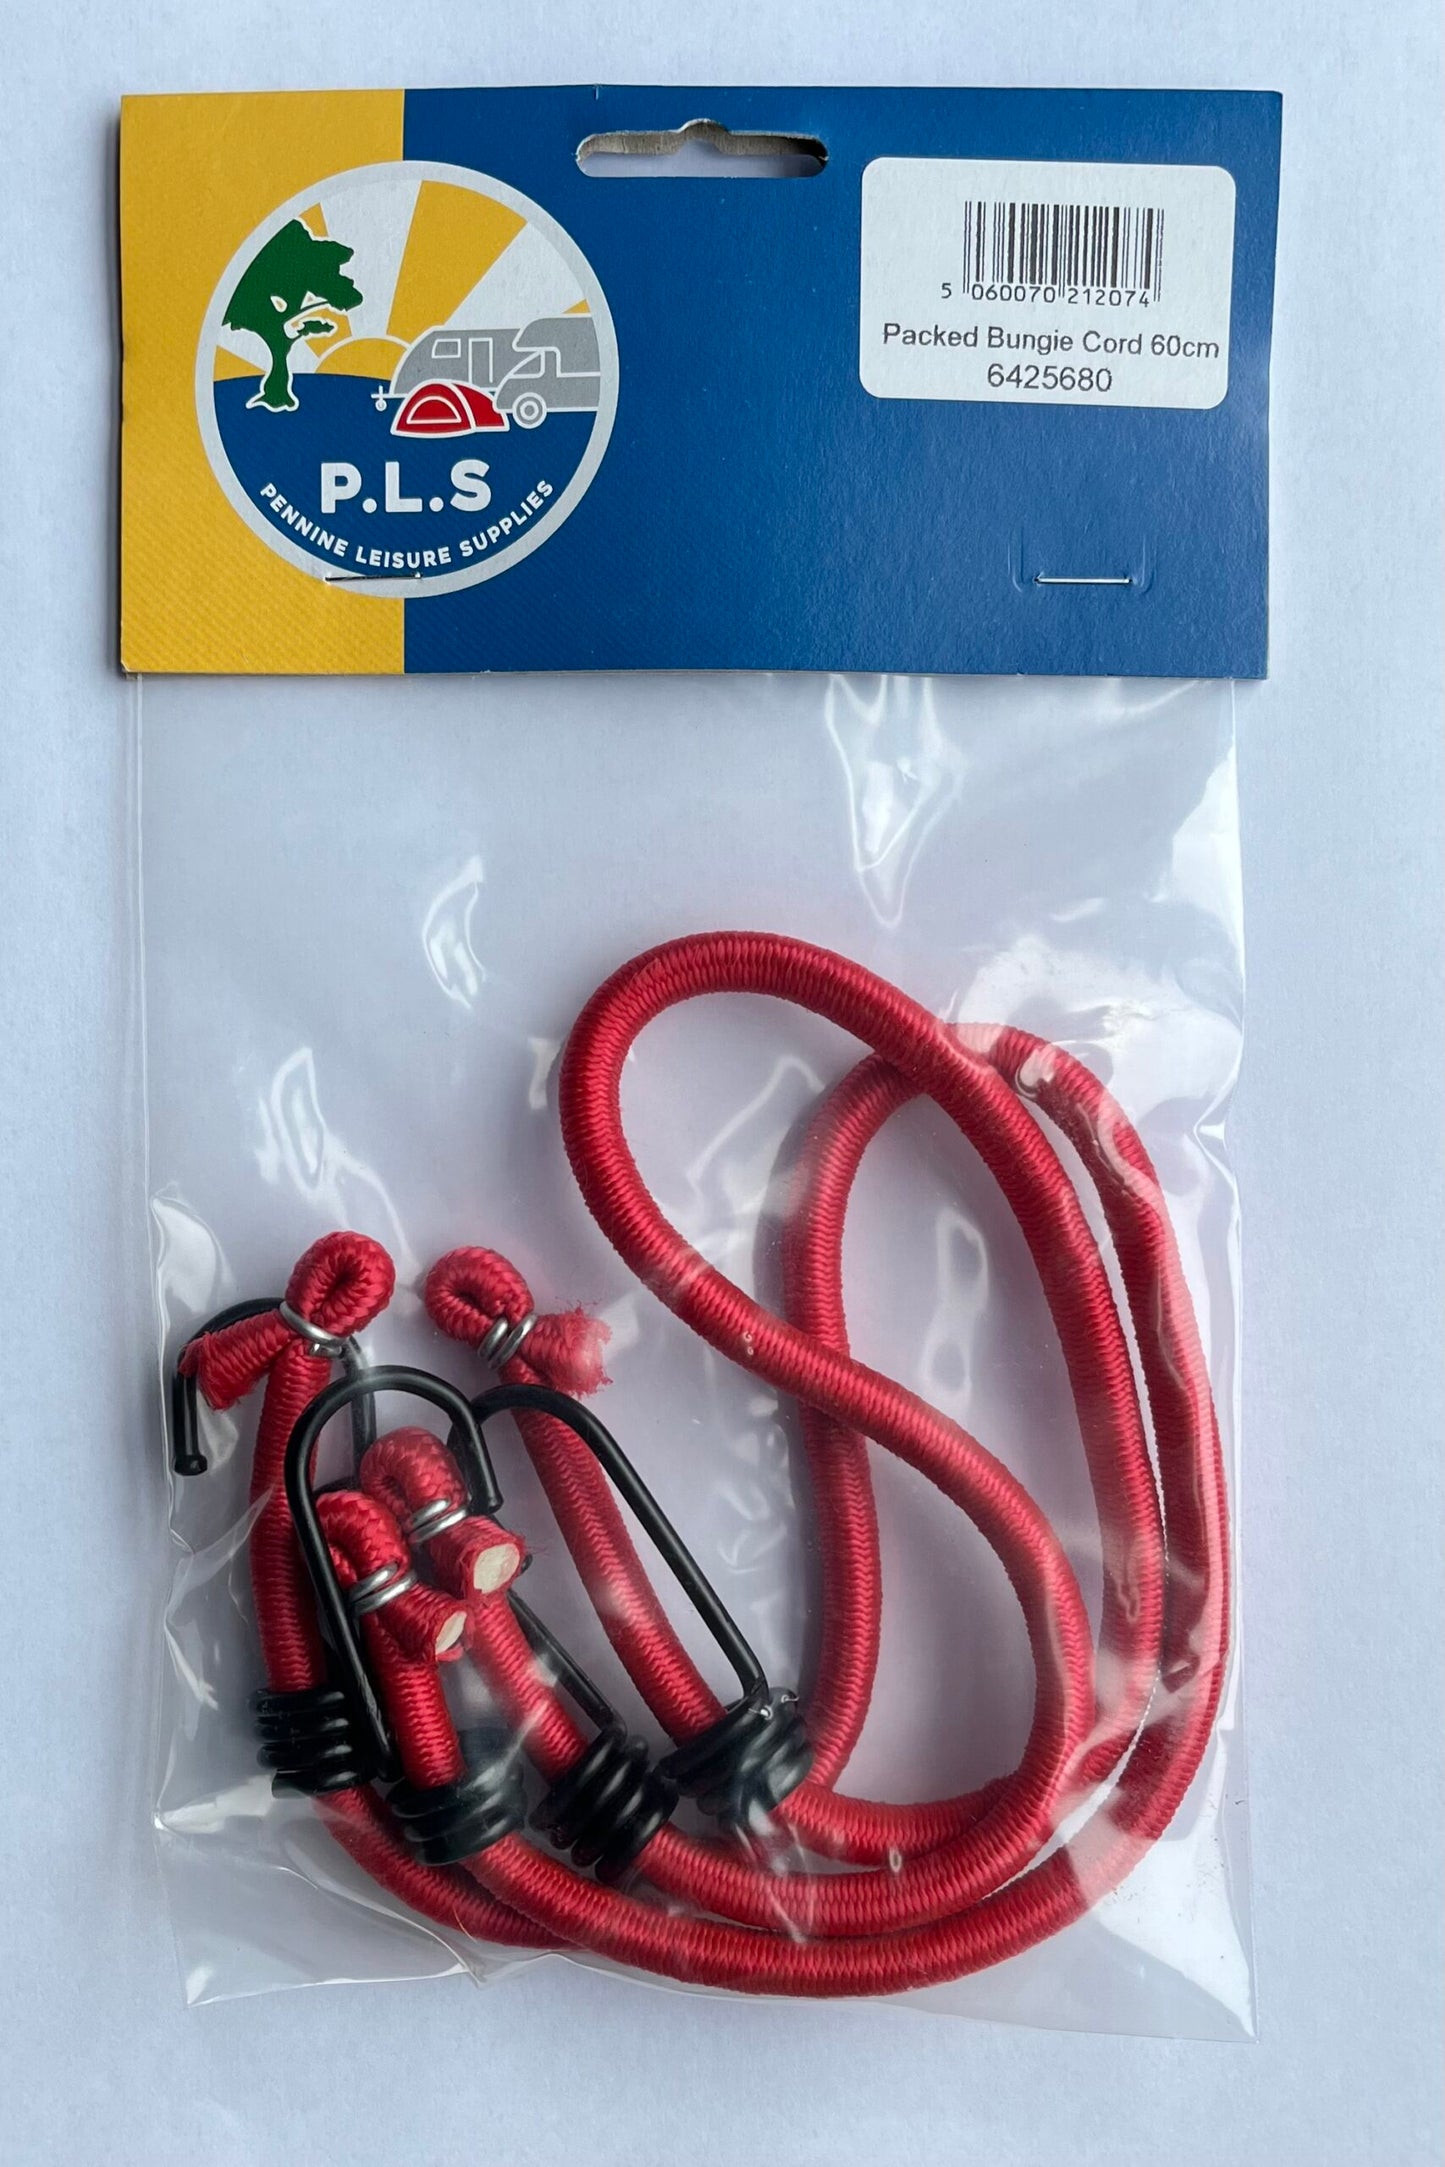 Packed Bungee Cord 60cm